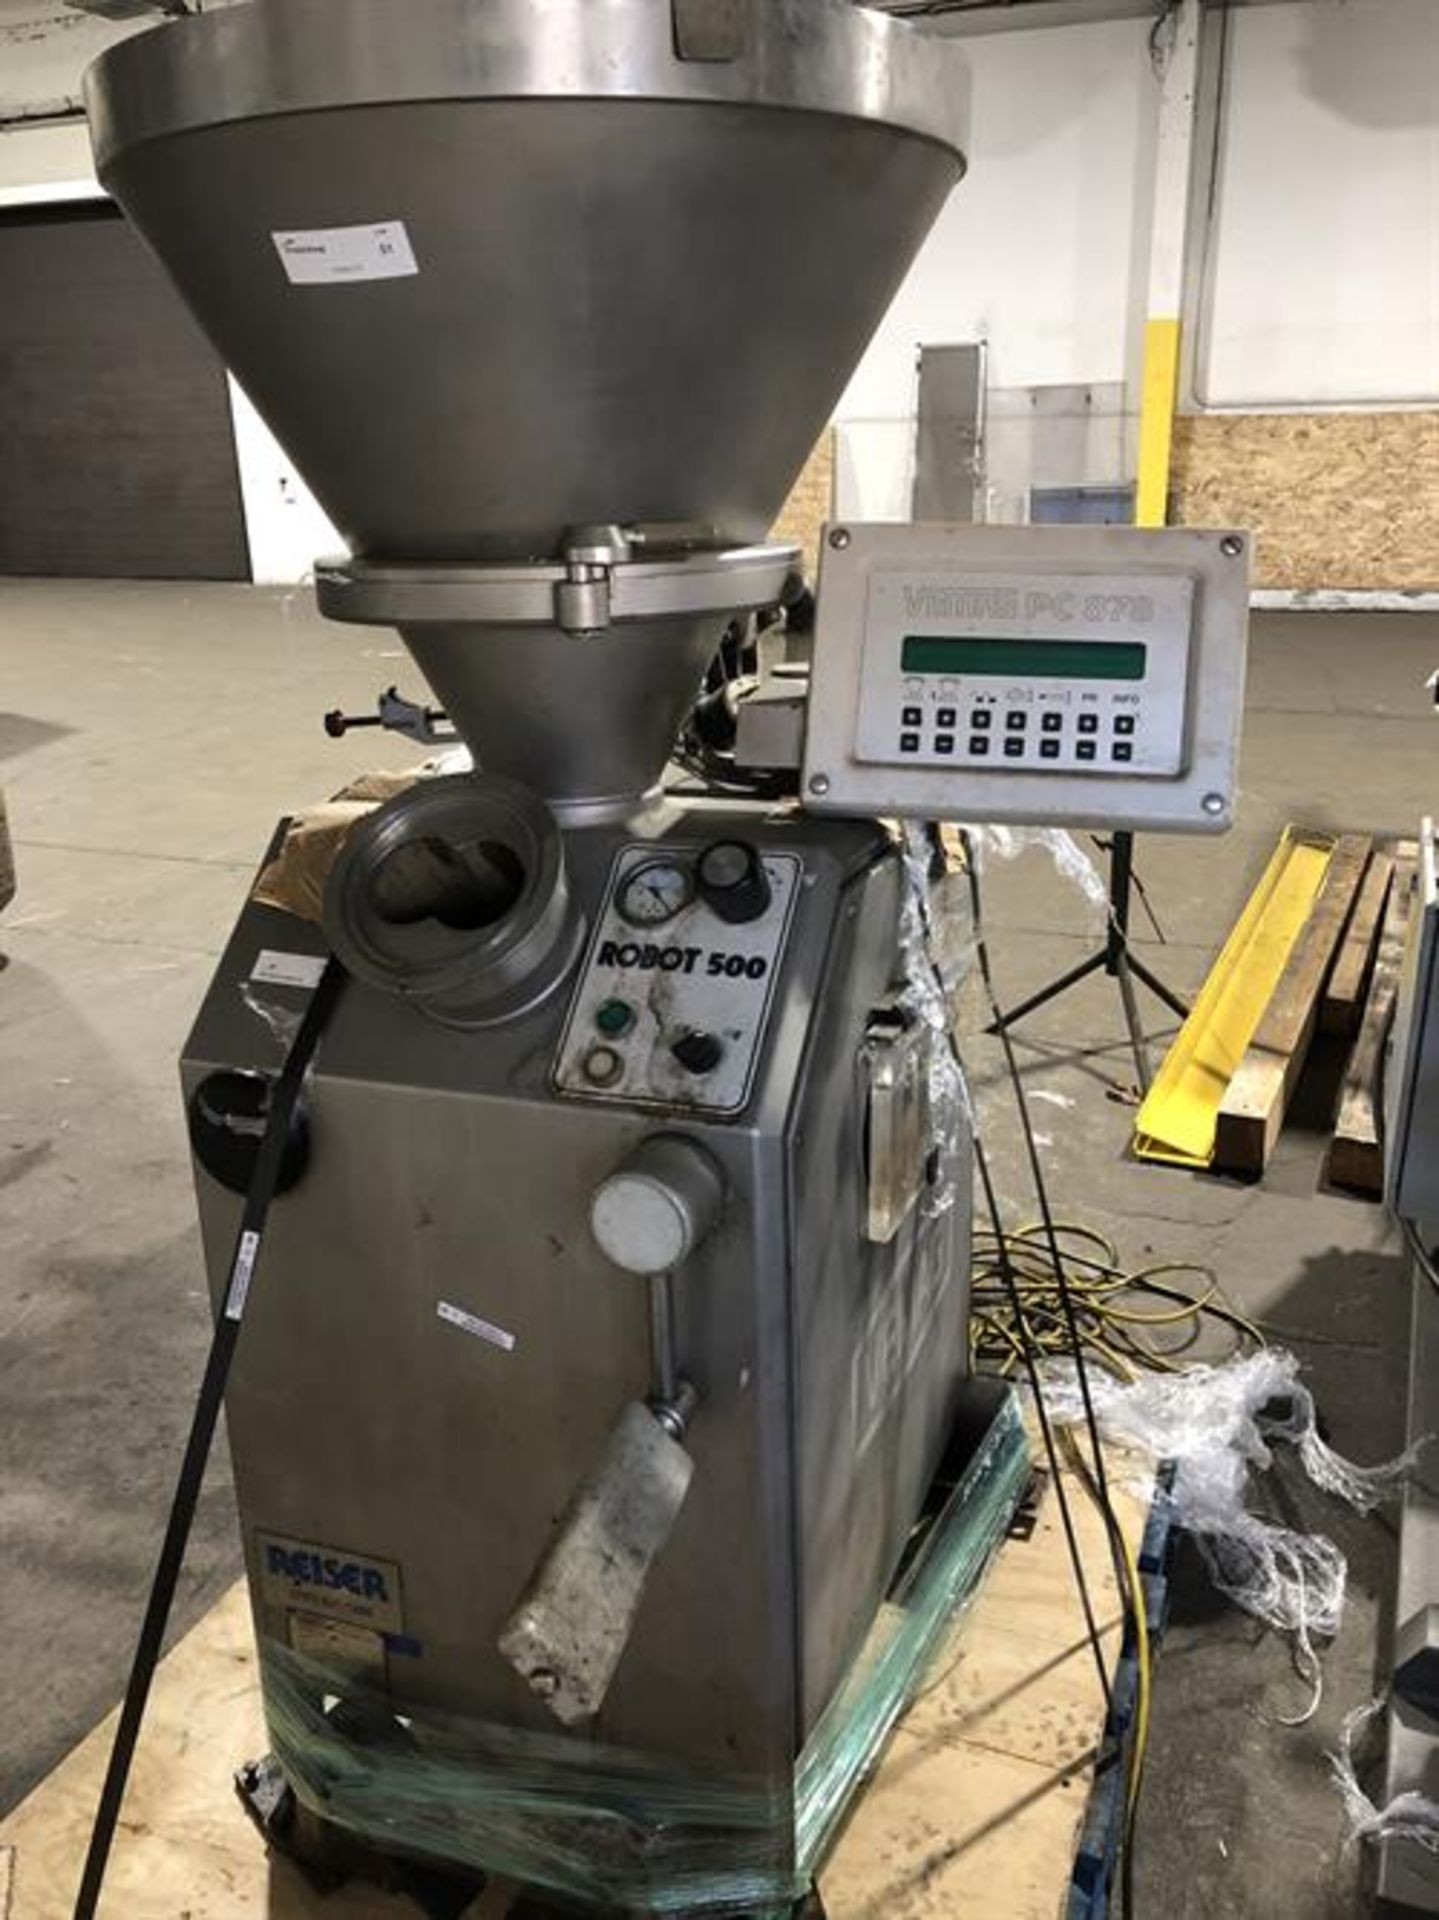 Vemag Robot 500 With PC 878 Portion Controls